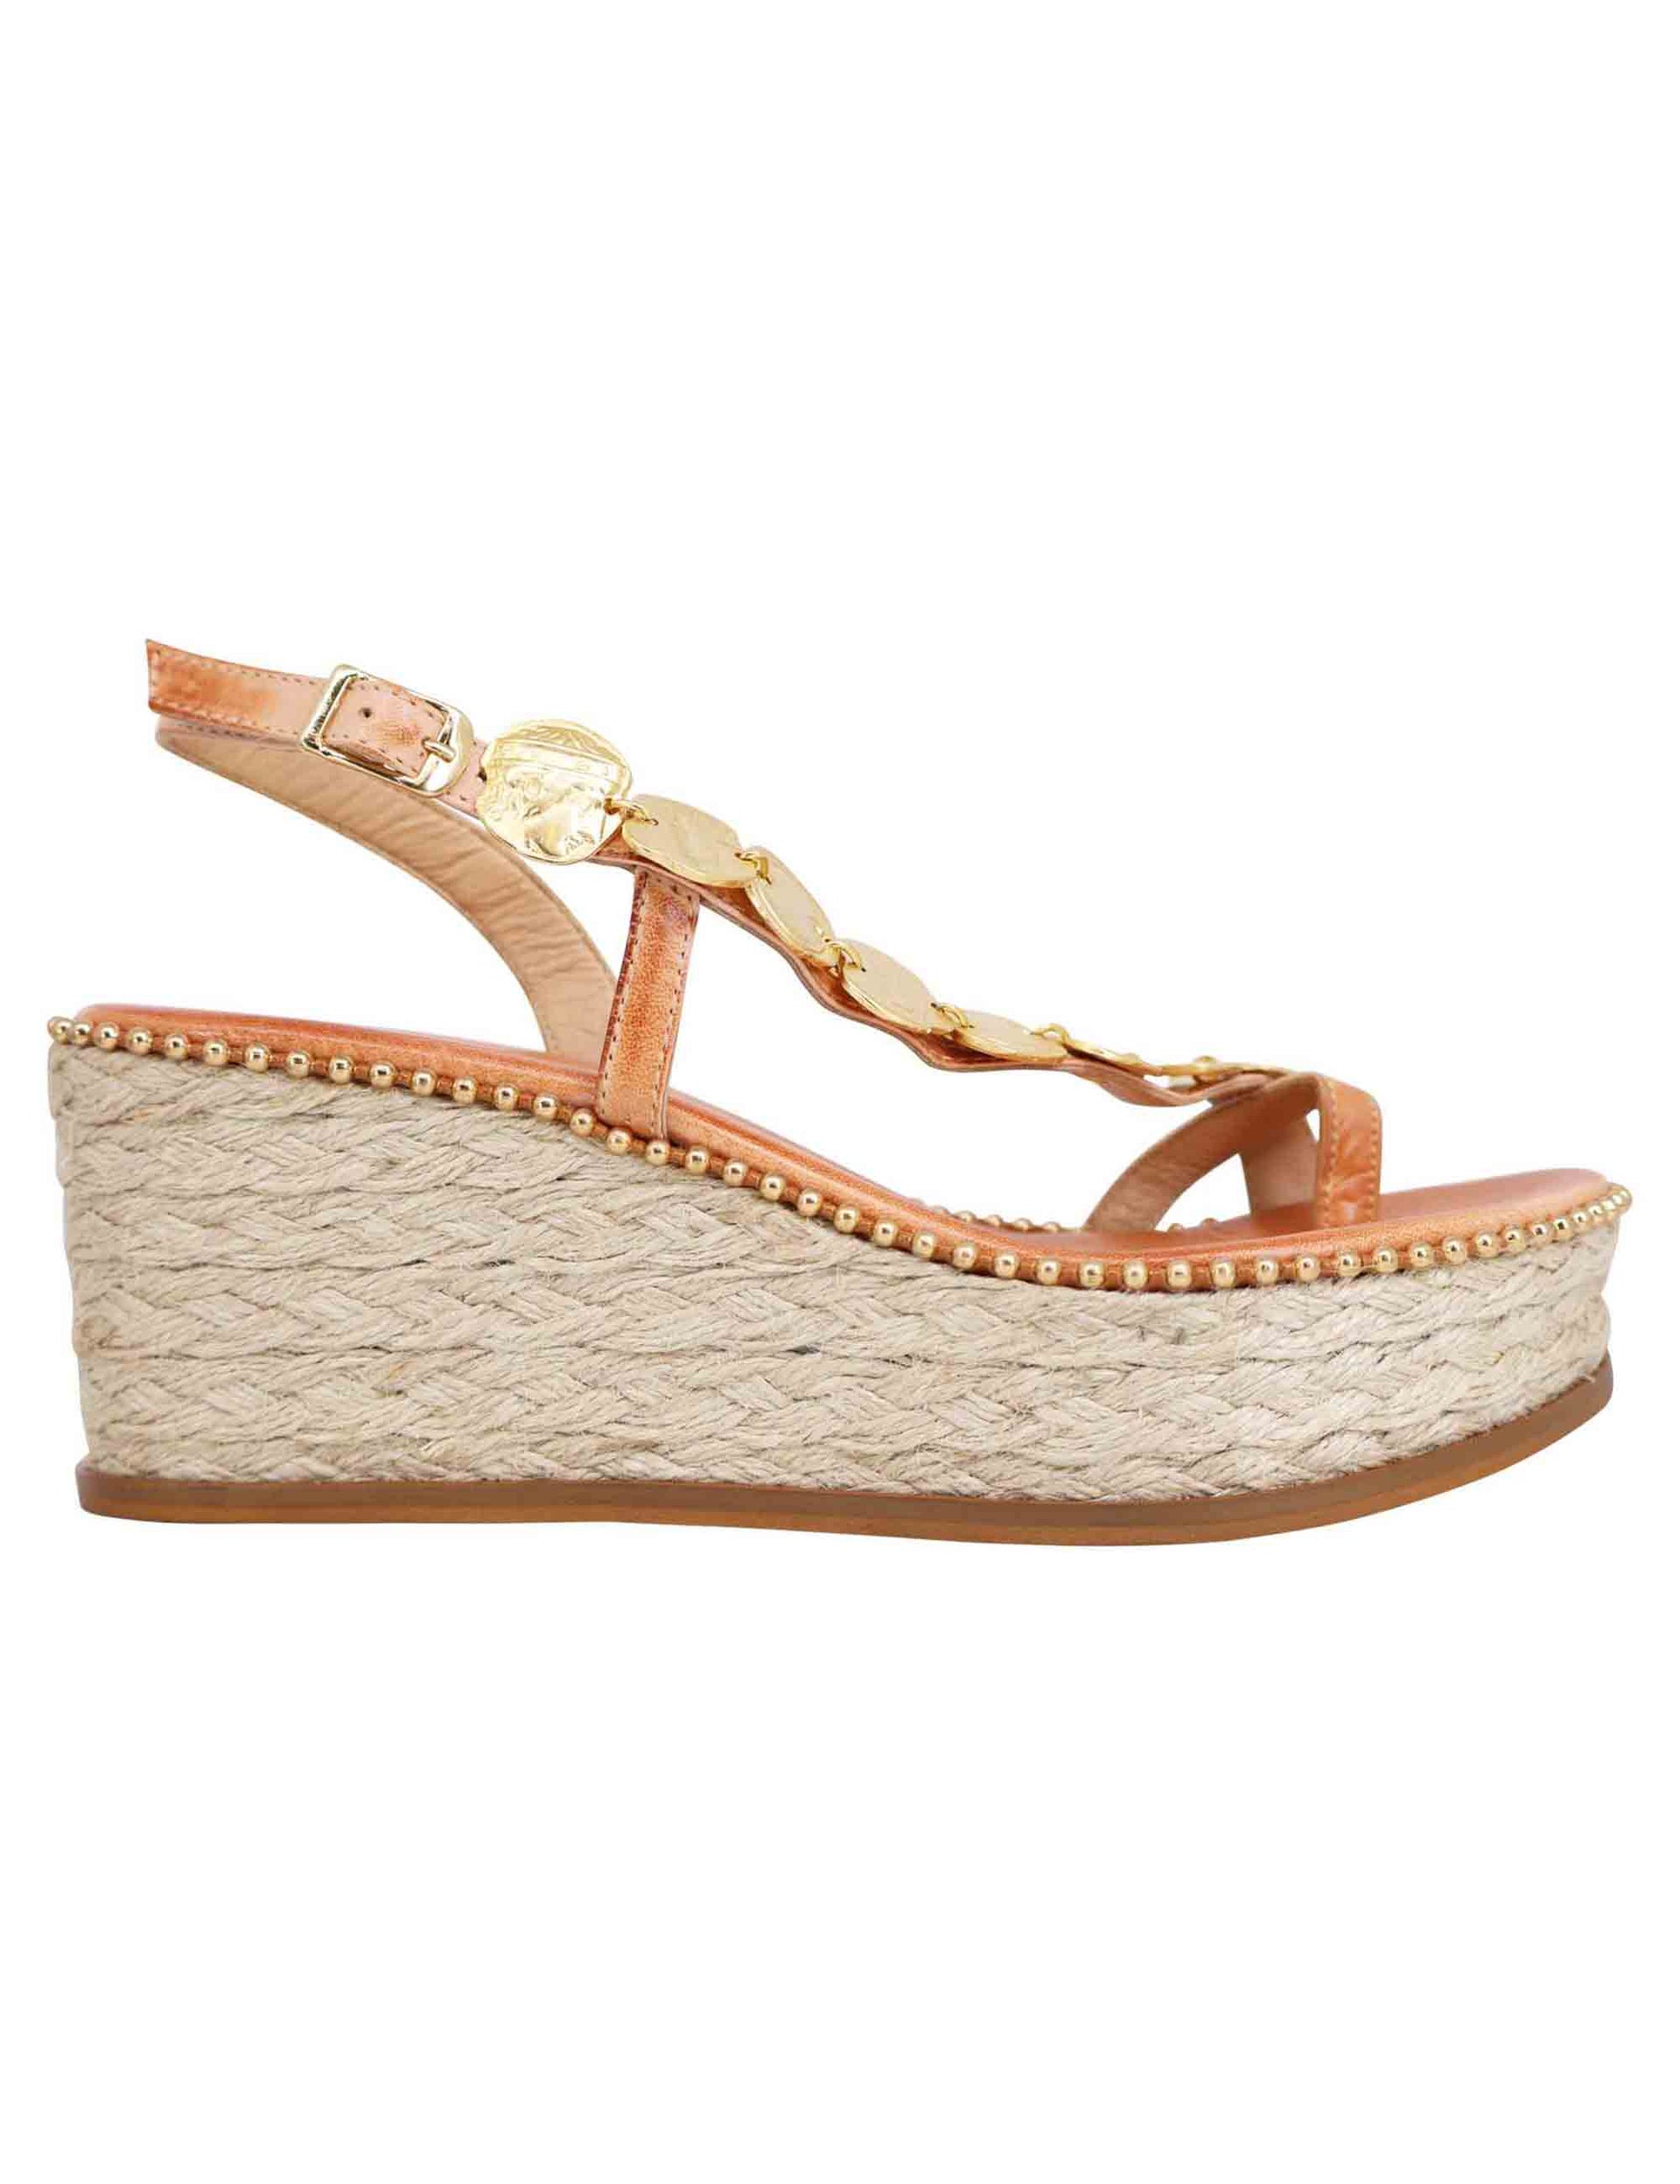 Women's flip-flop sandals in natural leather with gold accessories and rope wedge